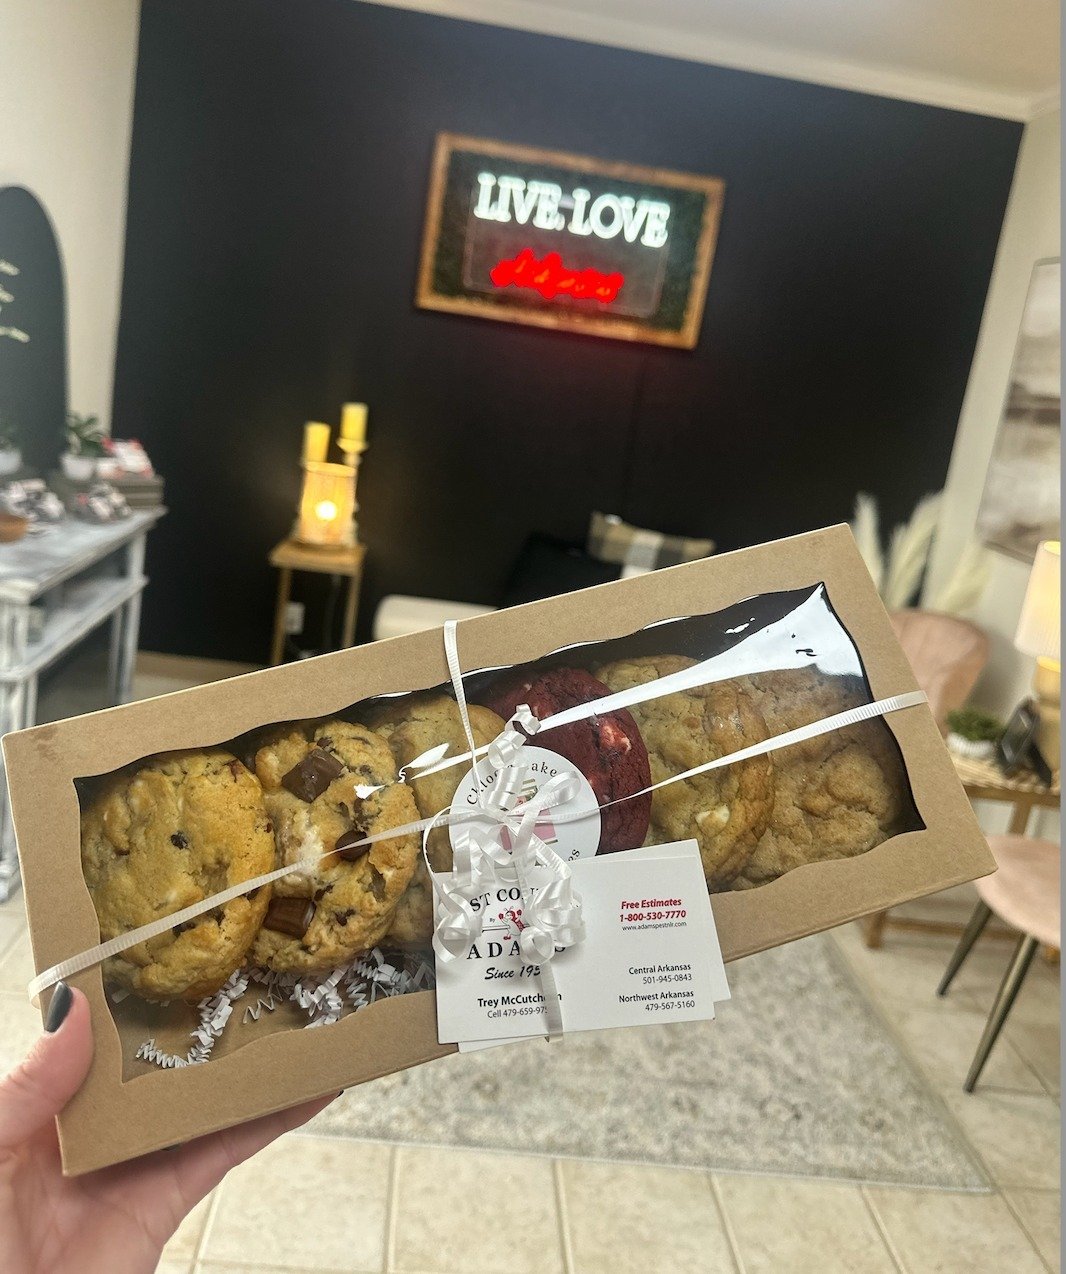 A heartfelt thank you to Trey from Adam&rsquo;s Pest Control for sweetening our day with a delightful surprise&mdash;those scrumptious cookies were the highlight of our day! 🍪✨ 
Your thoughtful gesture brought smiles to our faces and warmth to our h